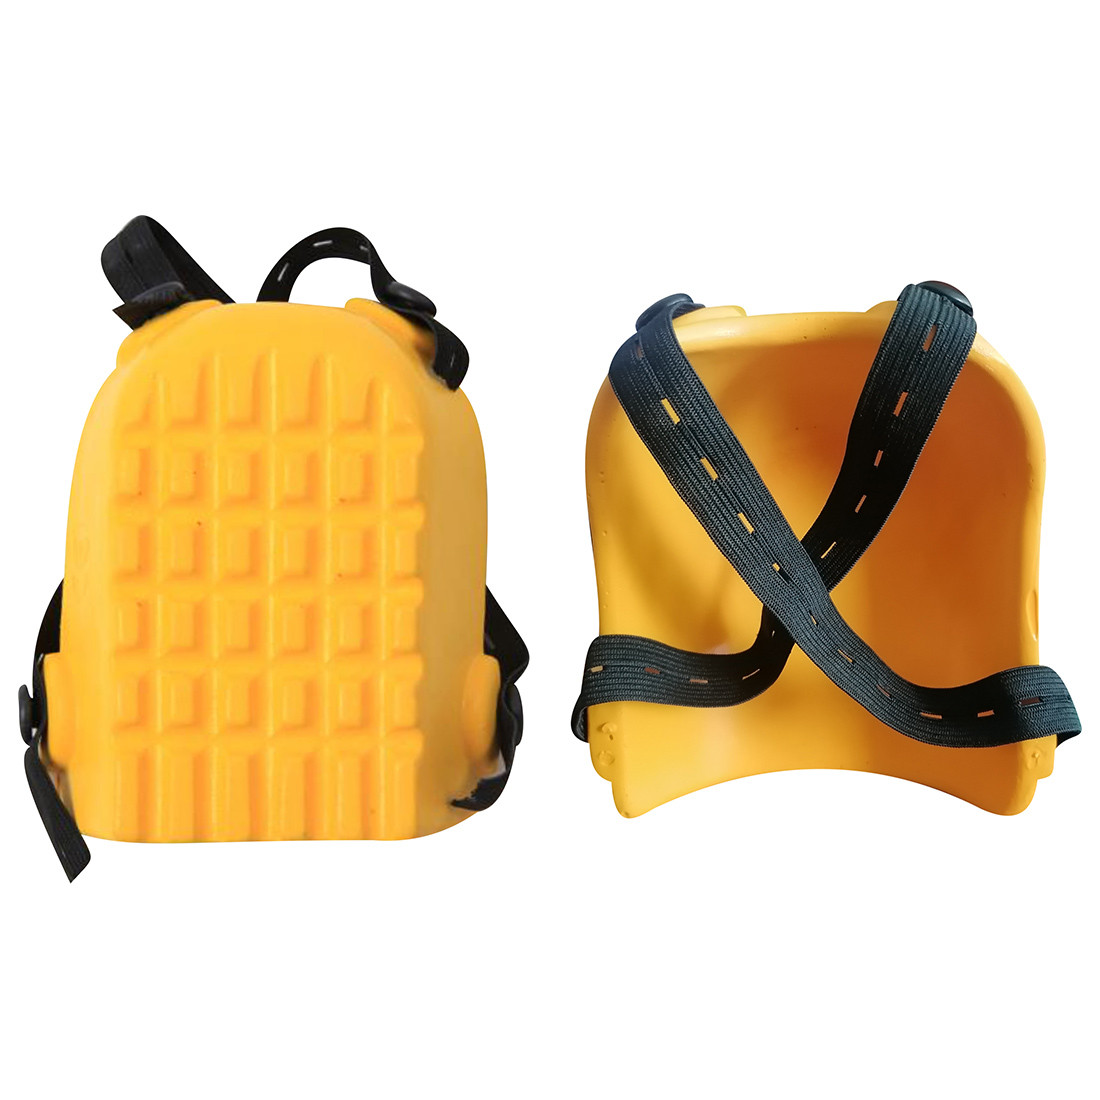 Polyurethane knee pads - Personal protection